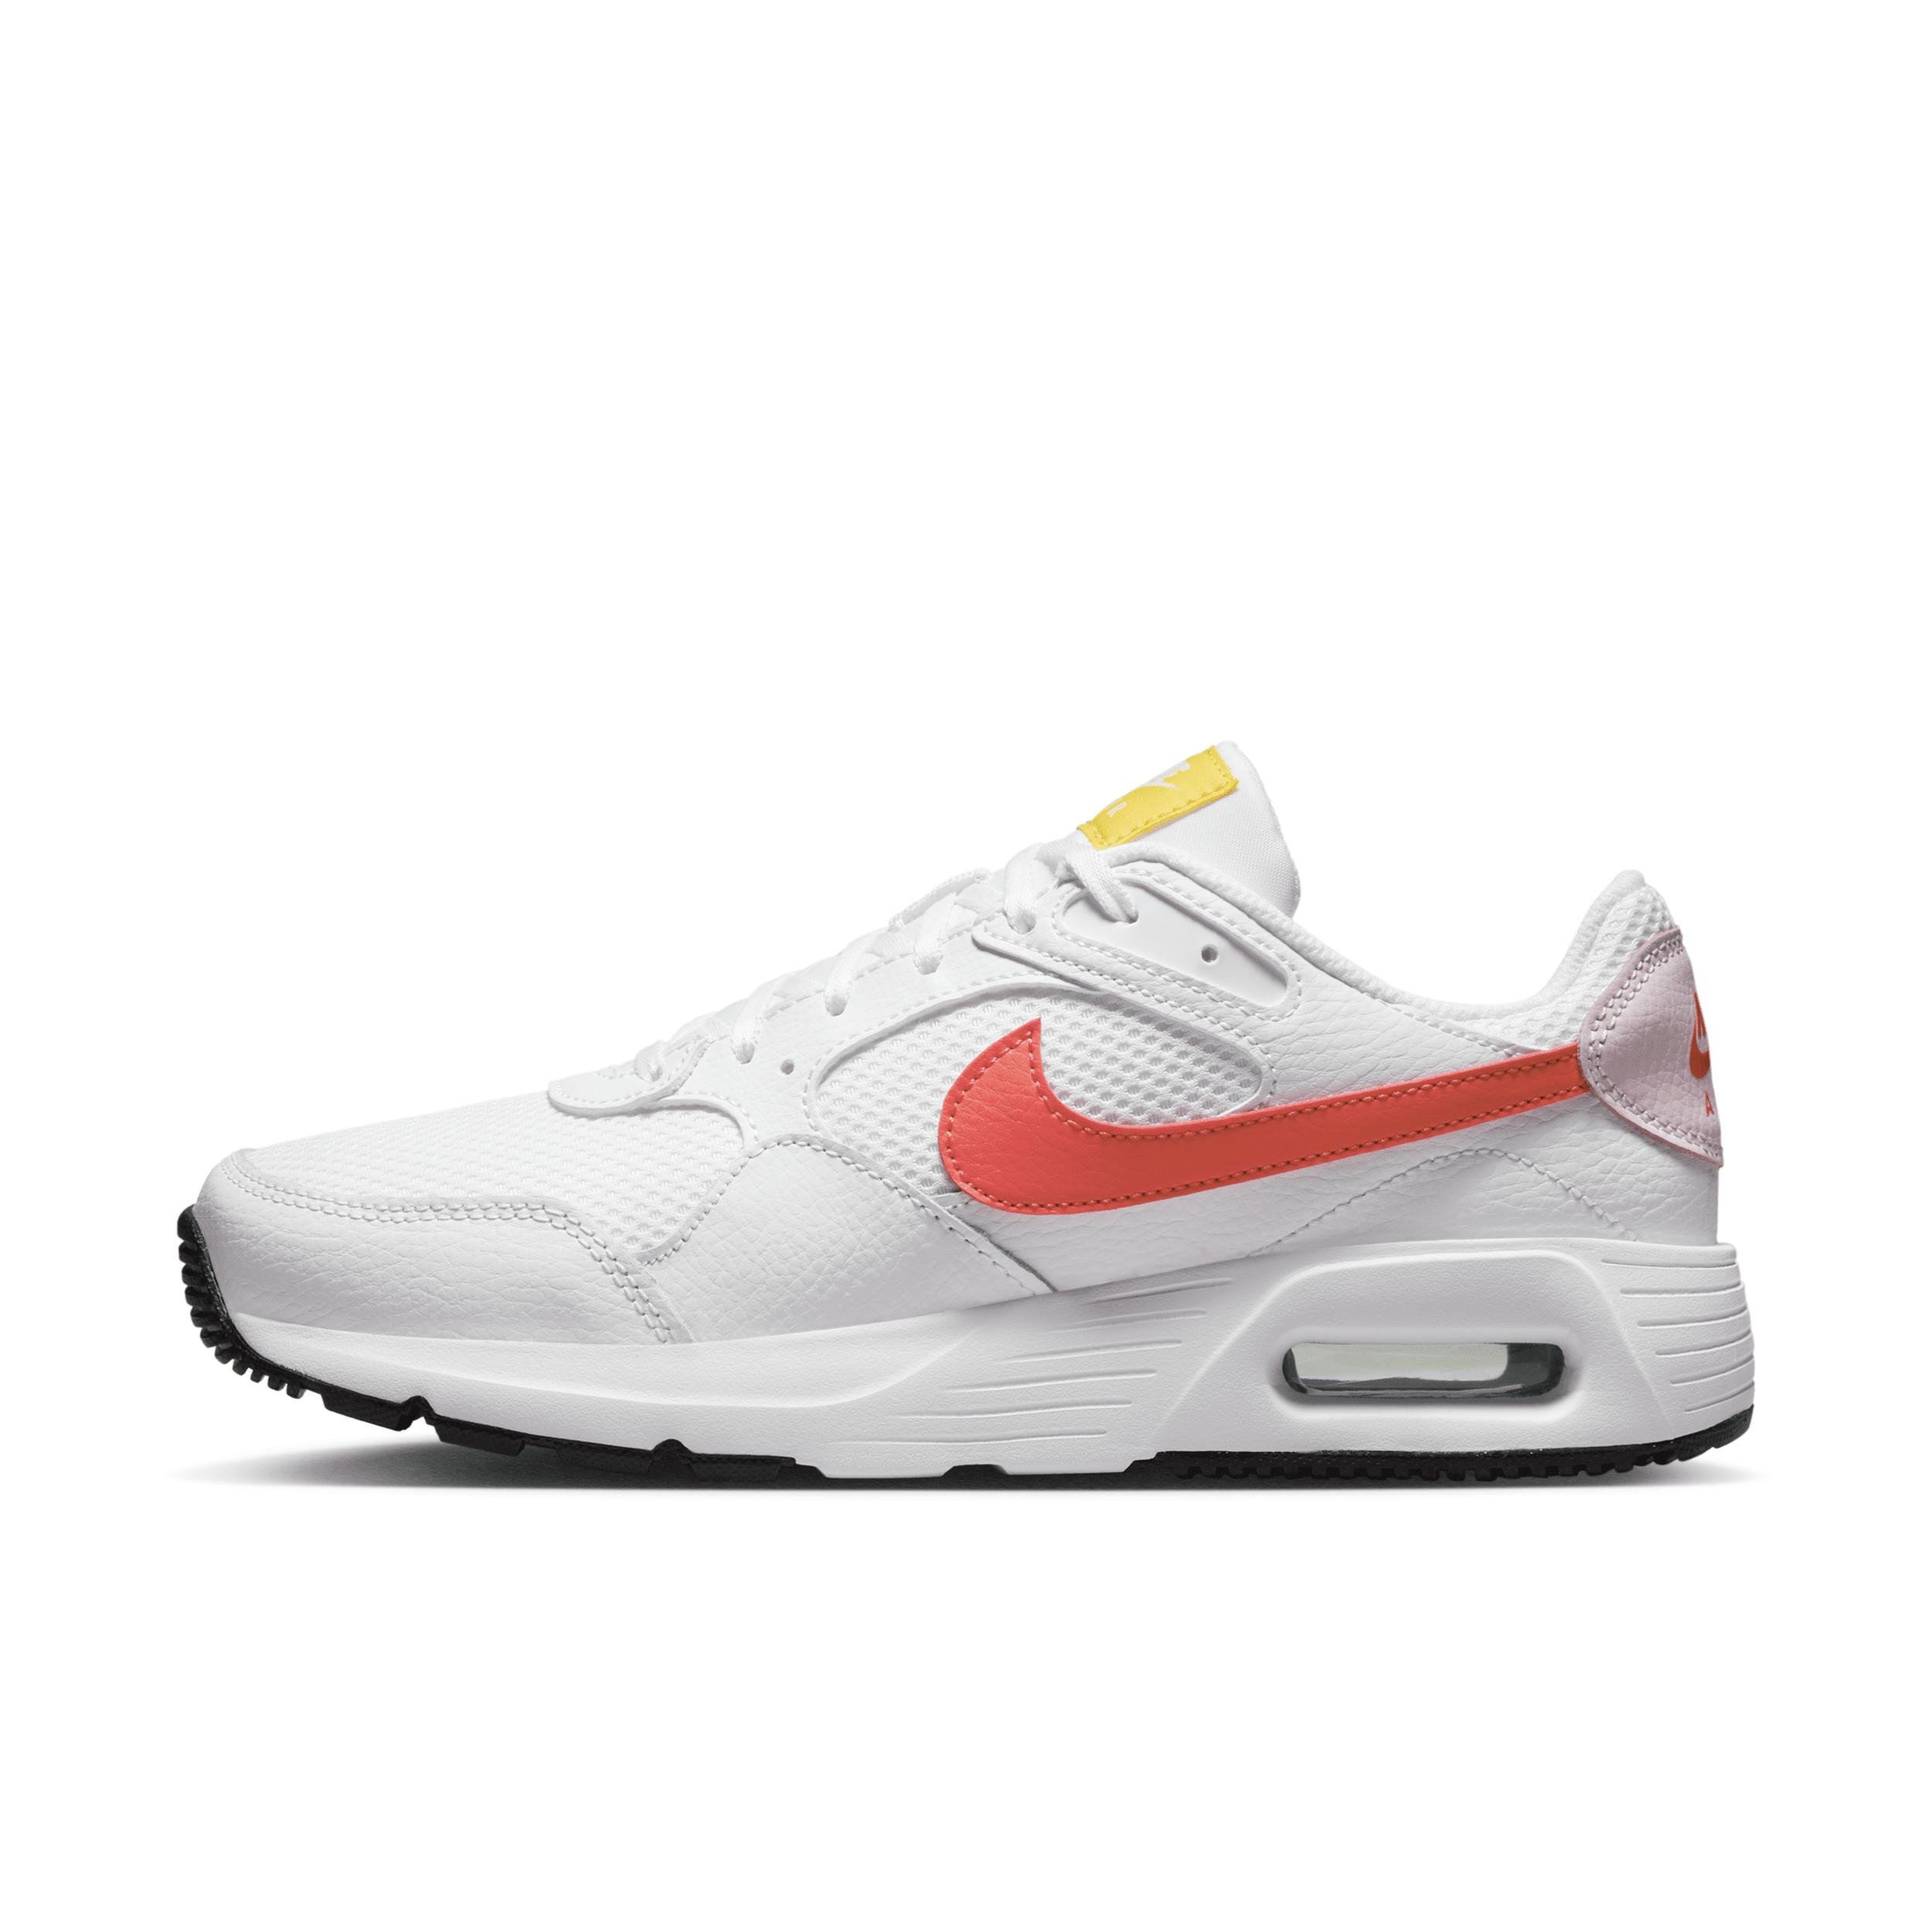 Nike Women's Air Max SC Shoes by NIKE